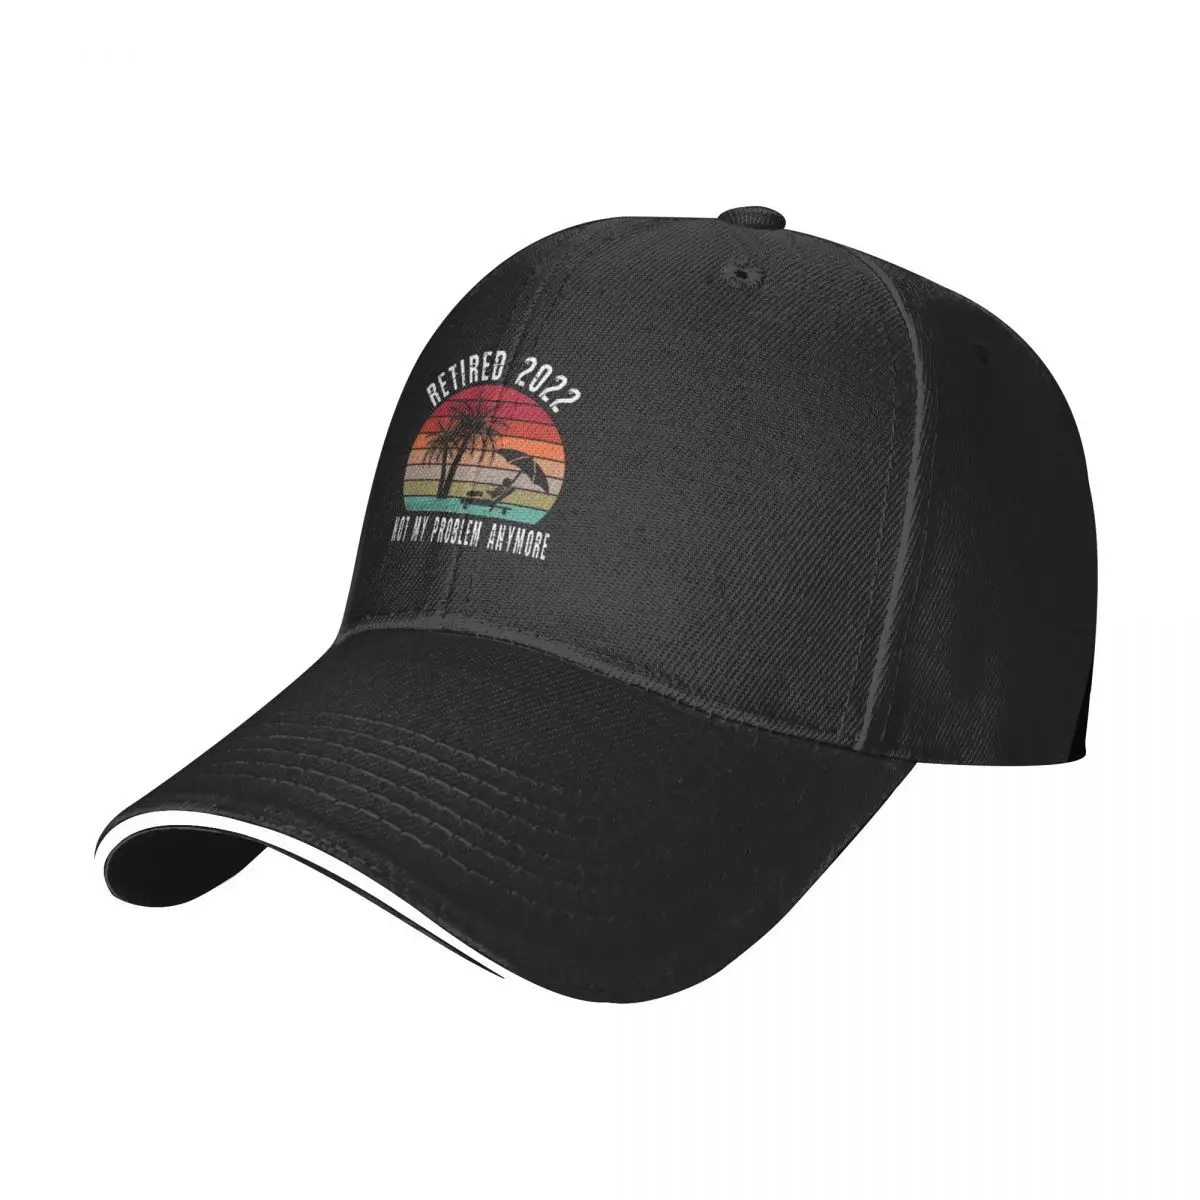 

TOOL Band Retired 2022 Not My Problem Anymore Retro Sunset With Distress Cap Baseball Cap Sun Hat Caps For Men Women's